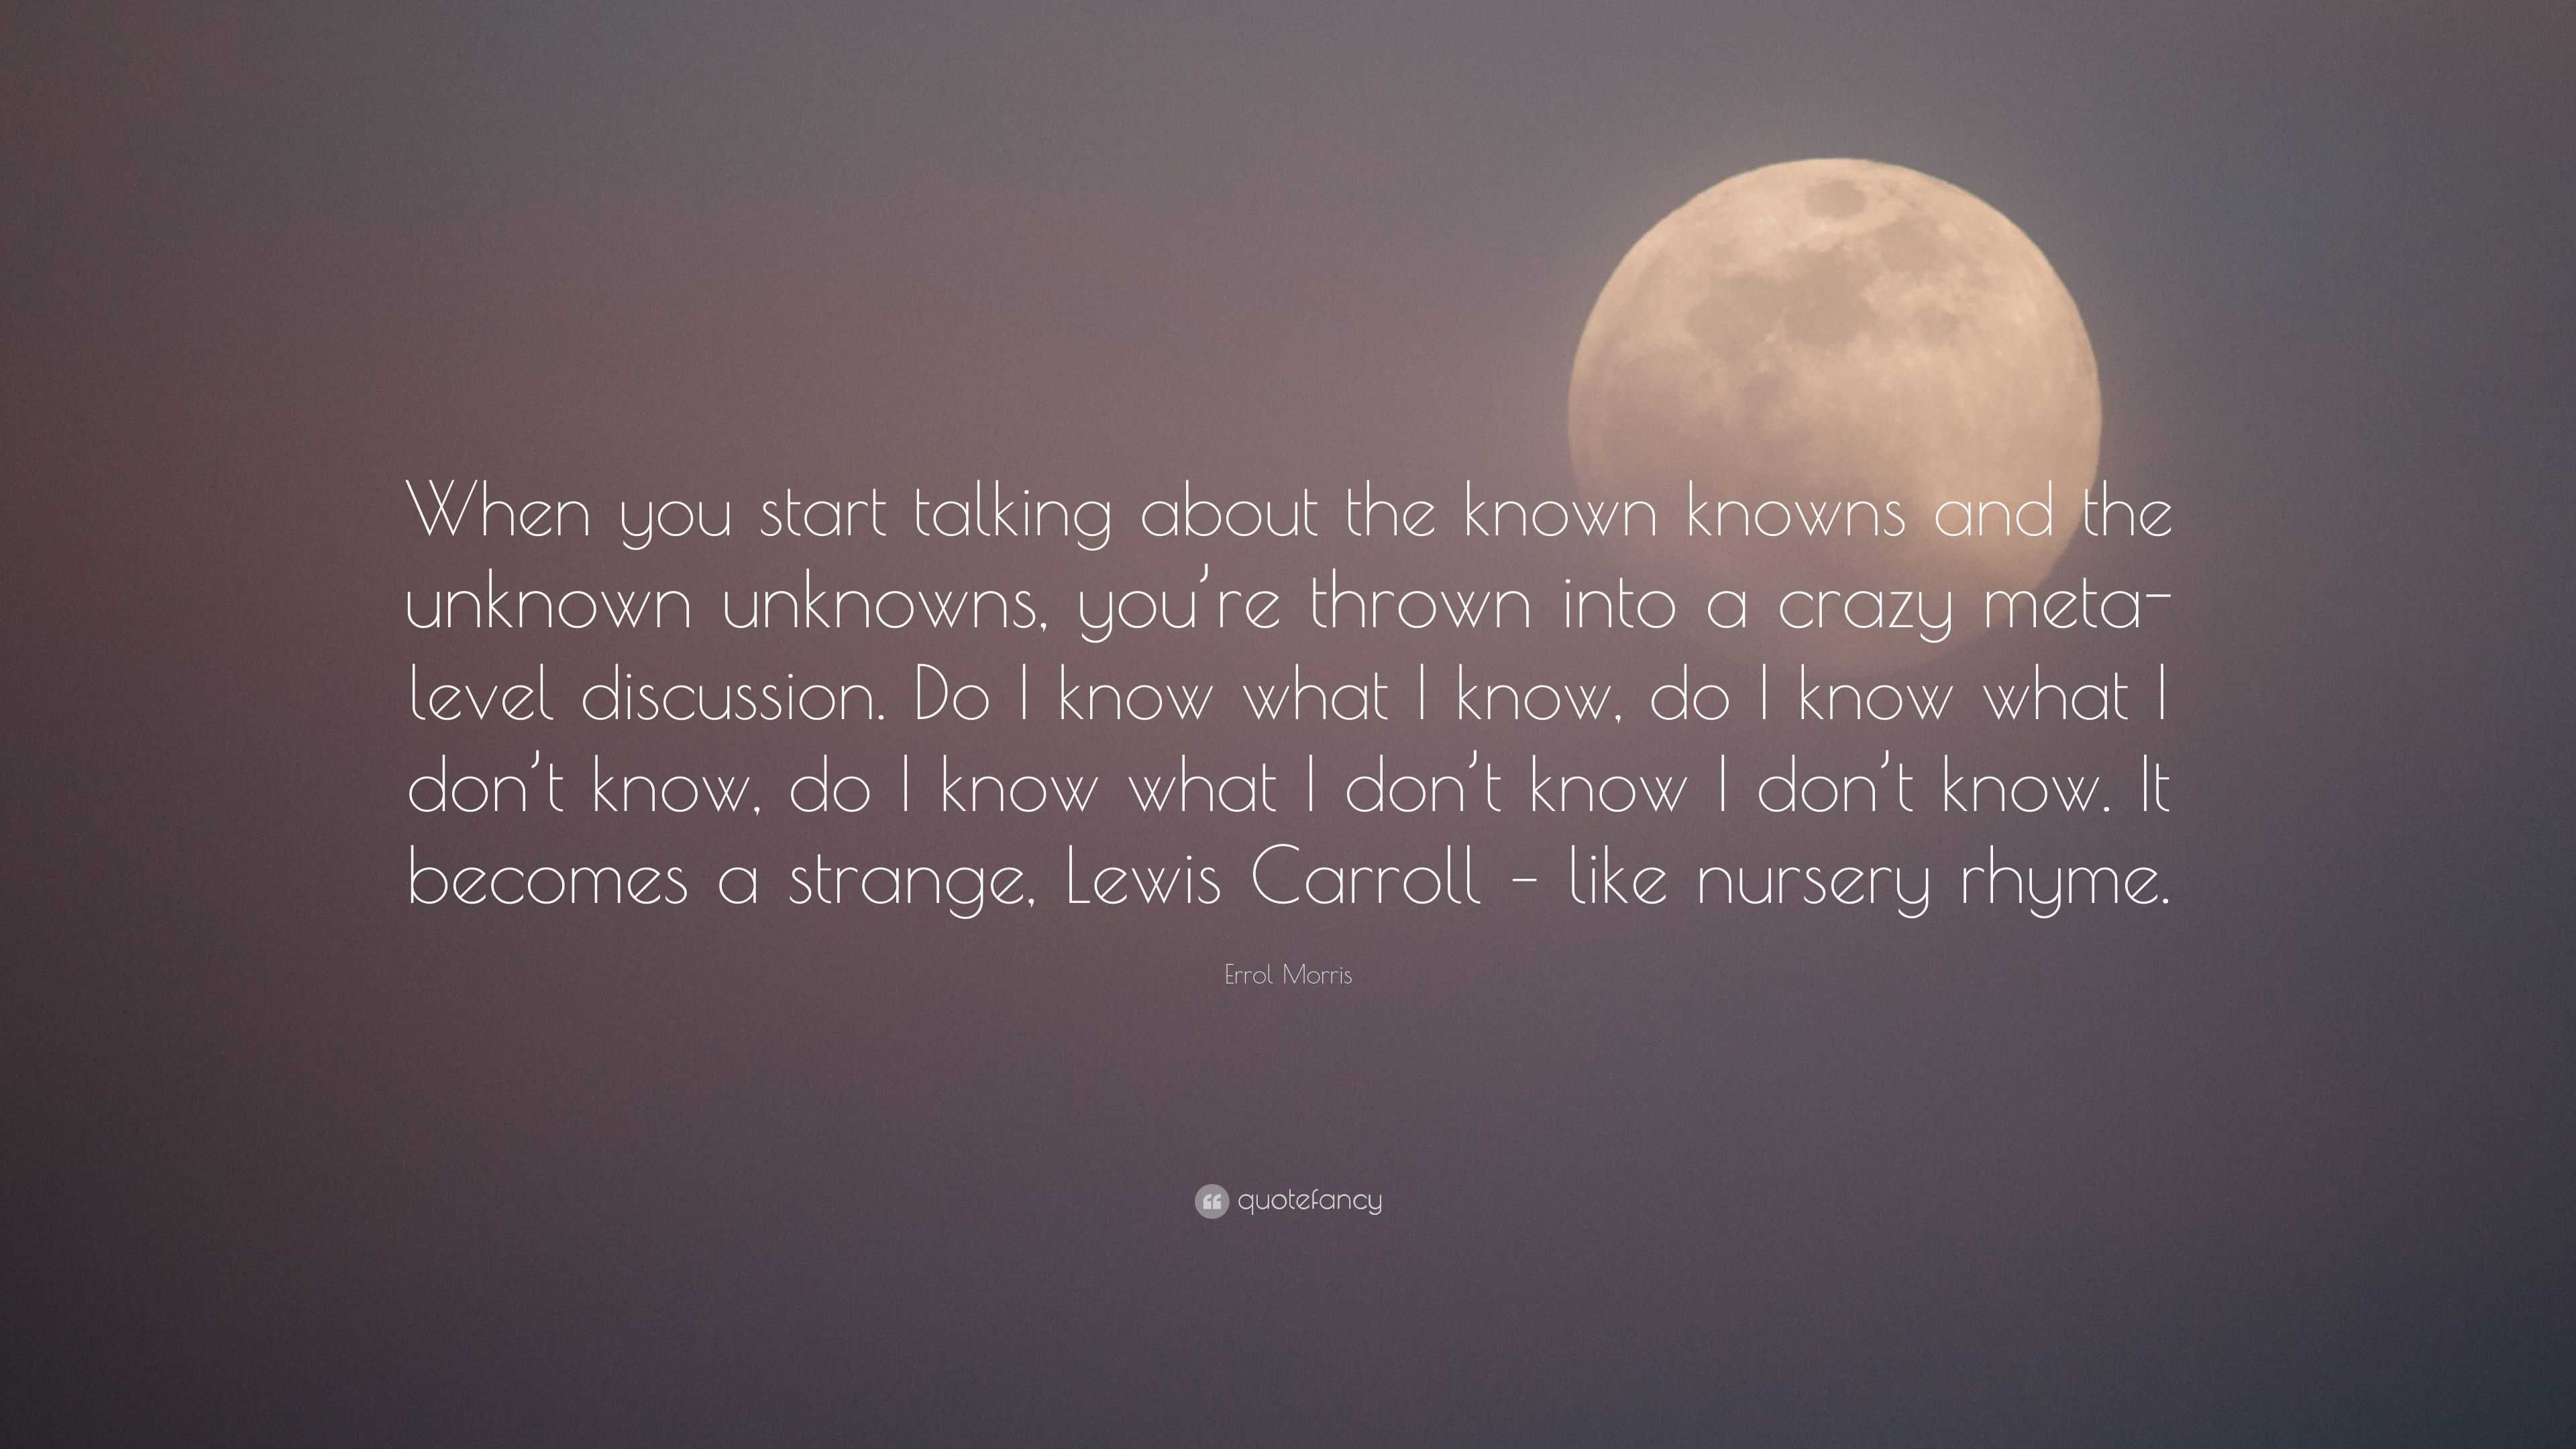 Errol Morris Quote: “When you start talking about the known knowns and ...